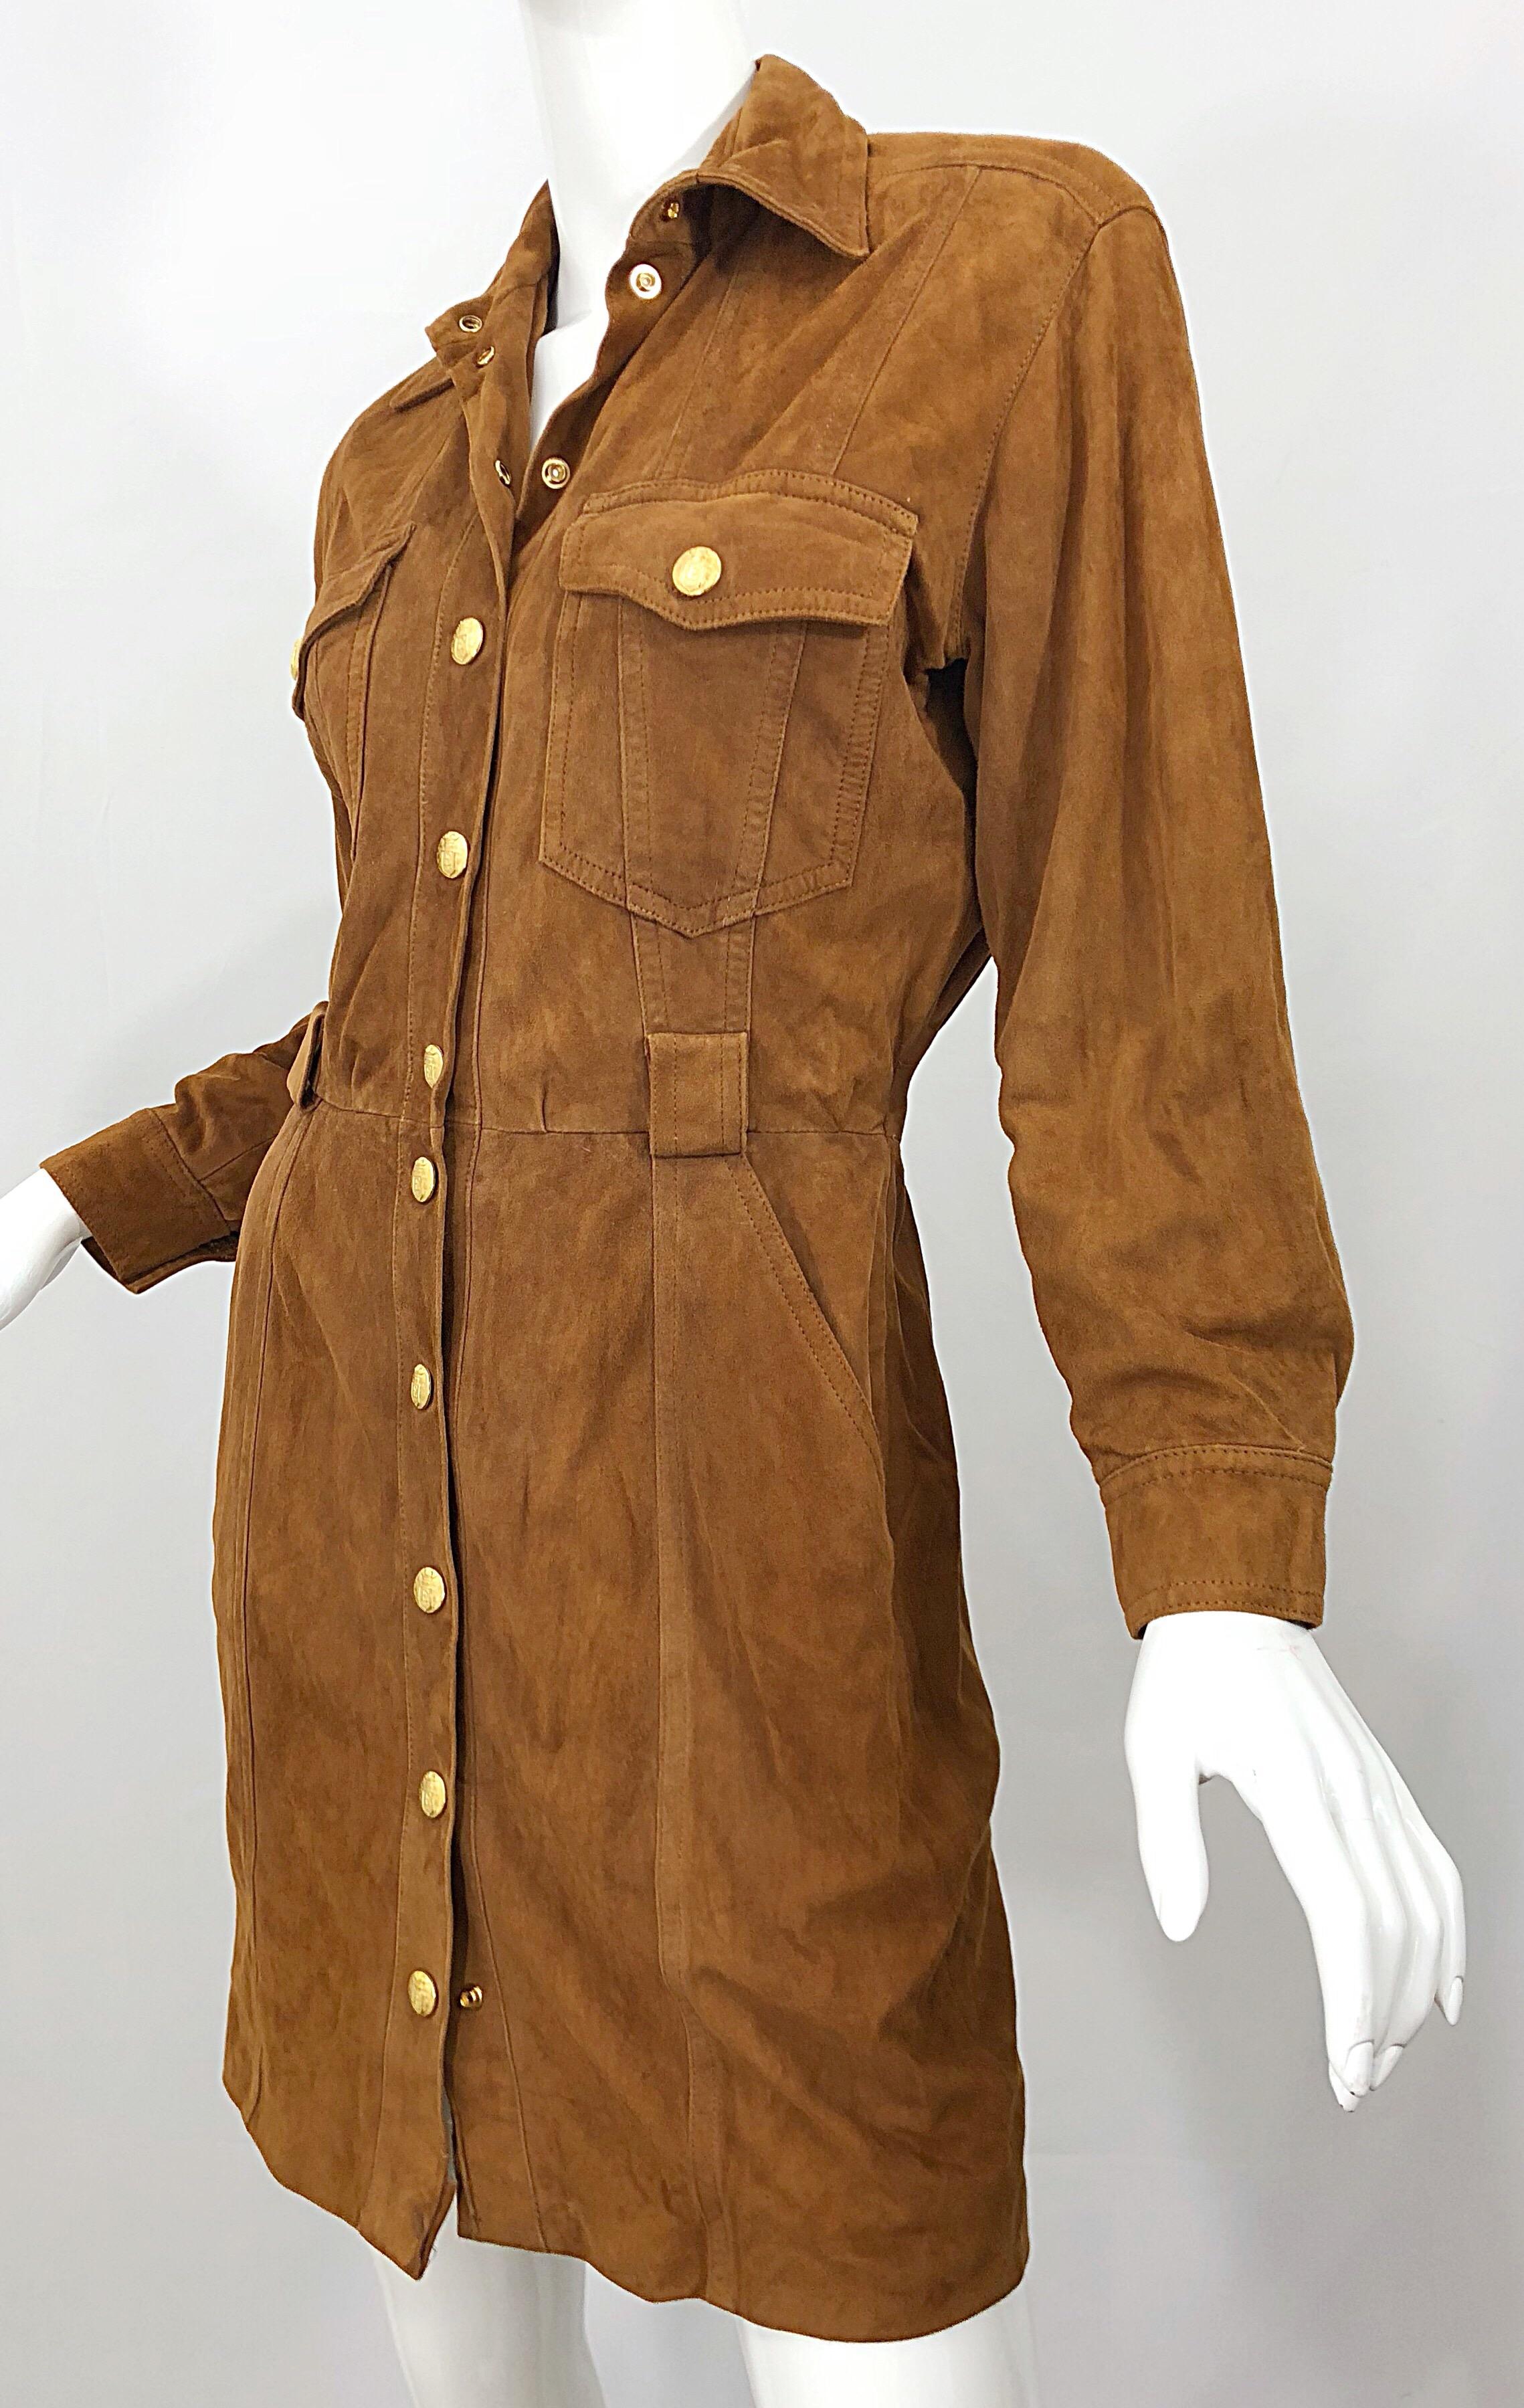 Vintage Escada by Margaretha Ley 1990s Saddle Brown Suede Leather Jacket Dress For Sale 1